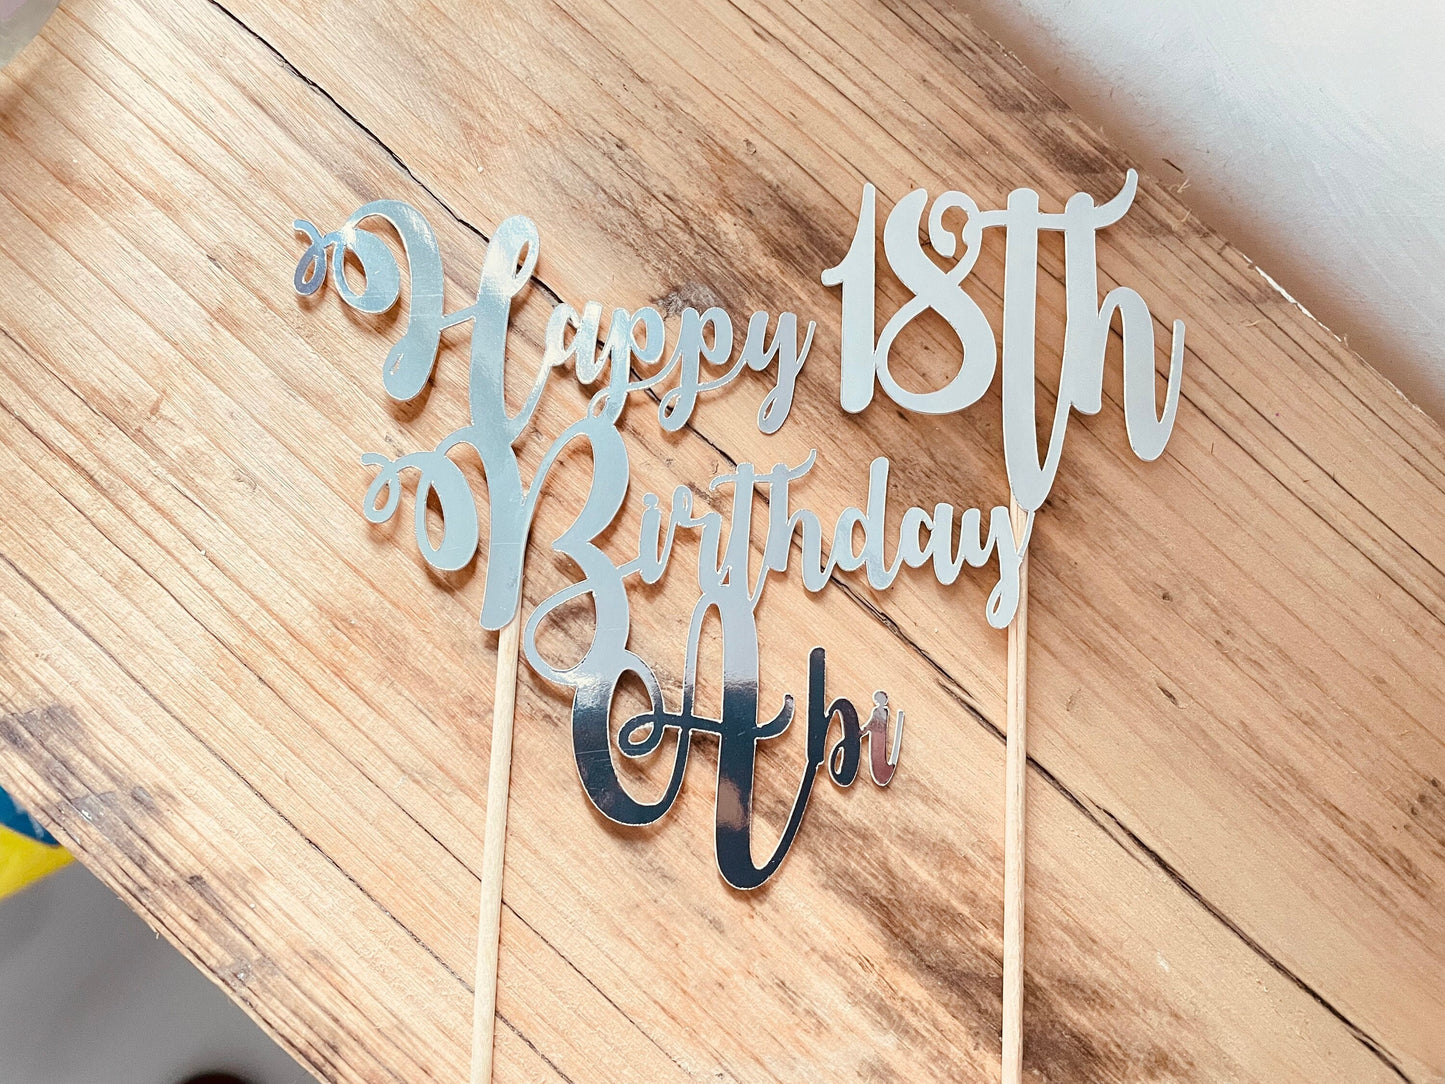 Personalised 18th Birthday Cake Topper, Happy Birthday Silver Calligraphy Script Font Cake Decoration, Large Celebration Cake Decoration